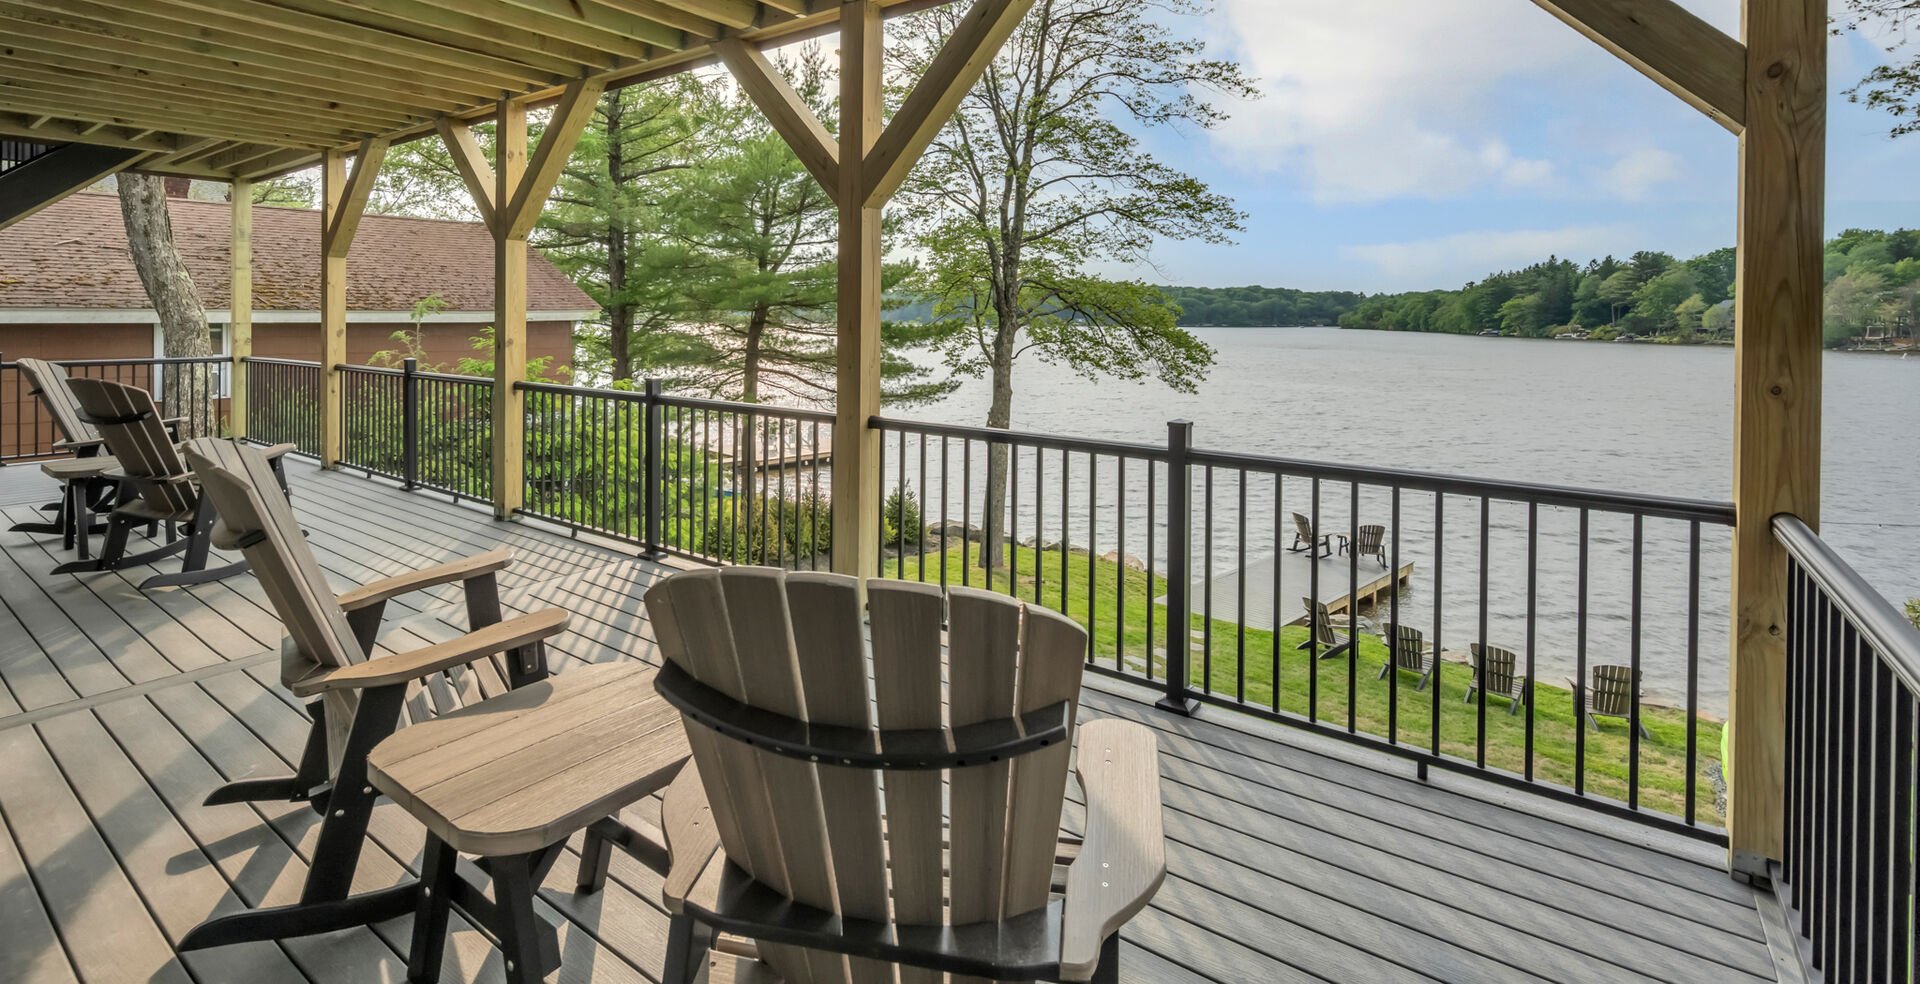 Easy, Breezy!!
Cool breezes off Lake Harmony are waiting for you.